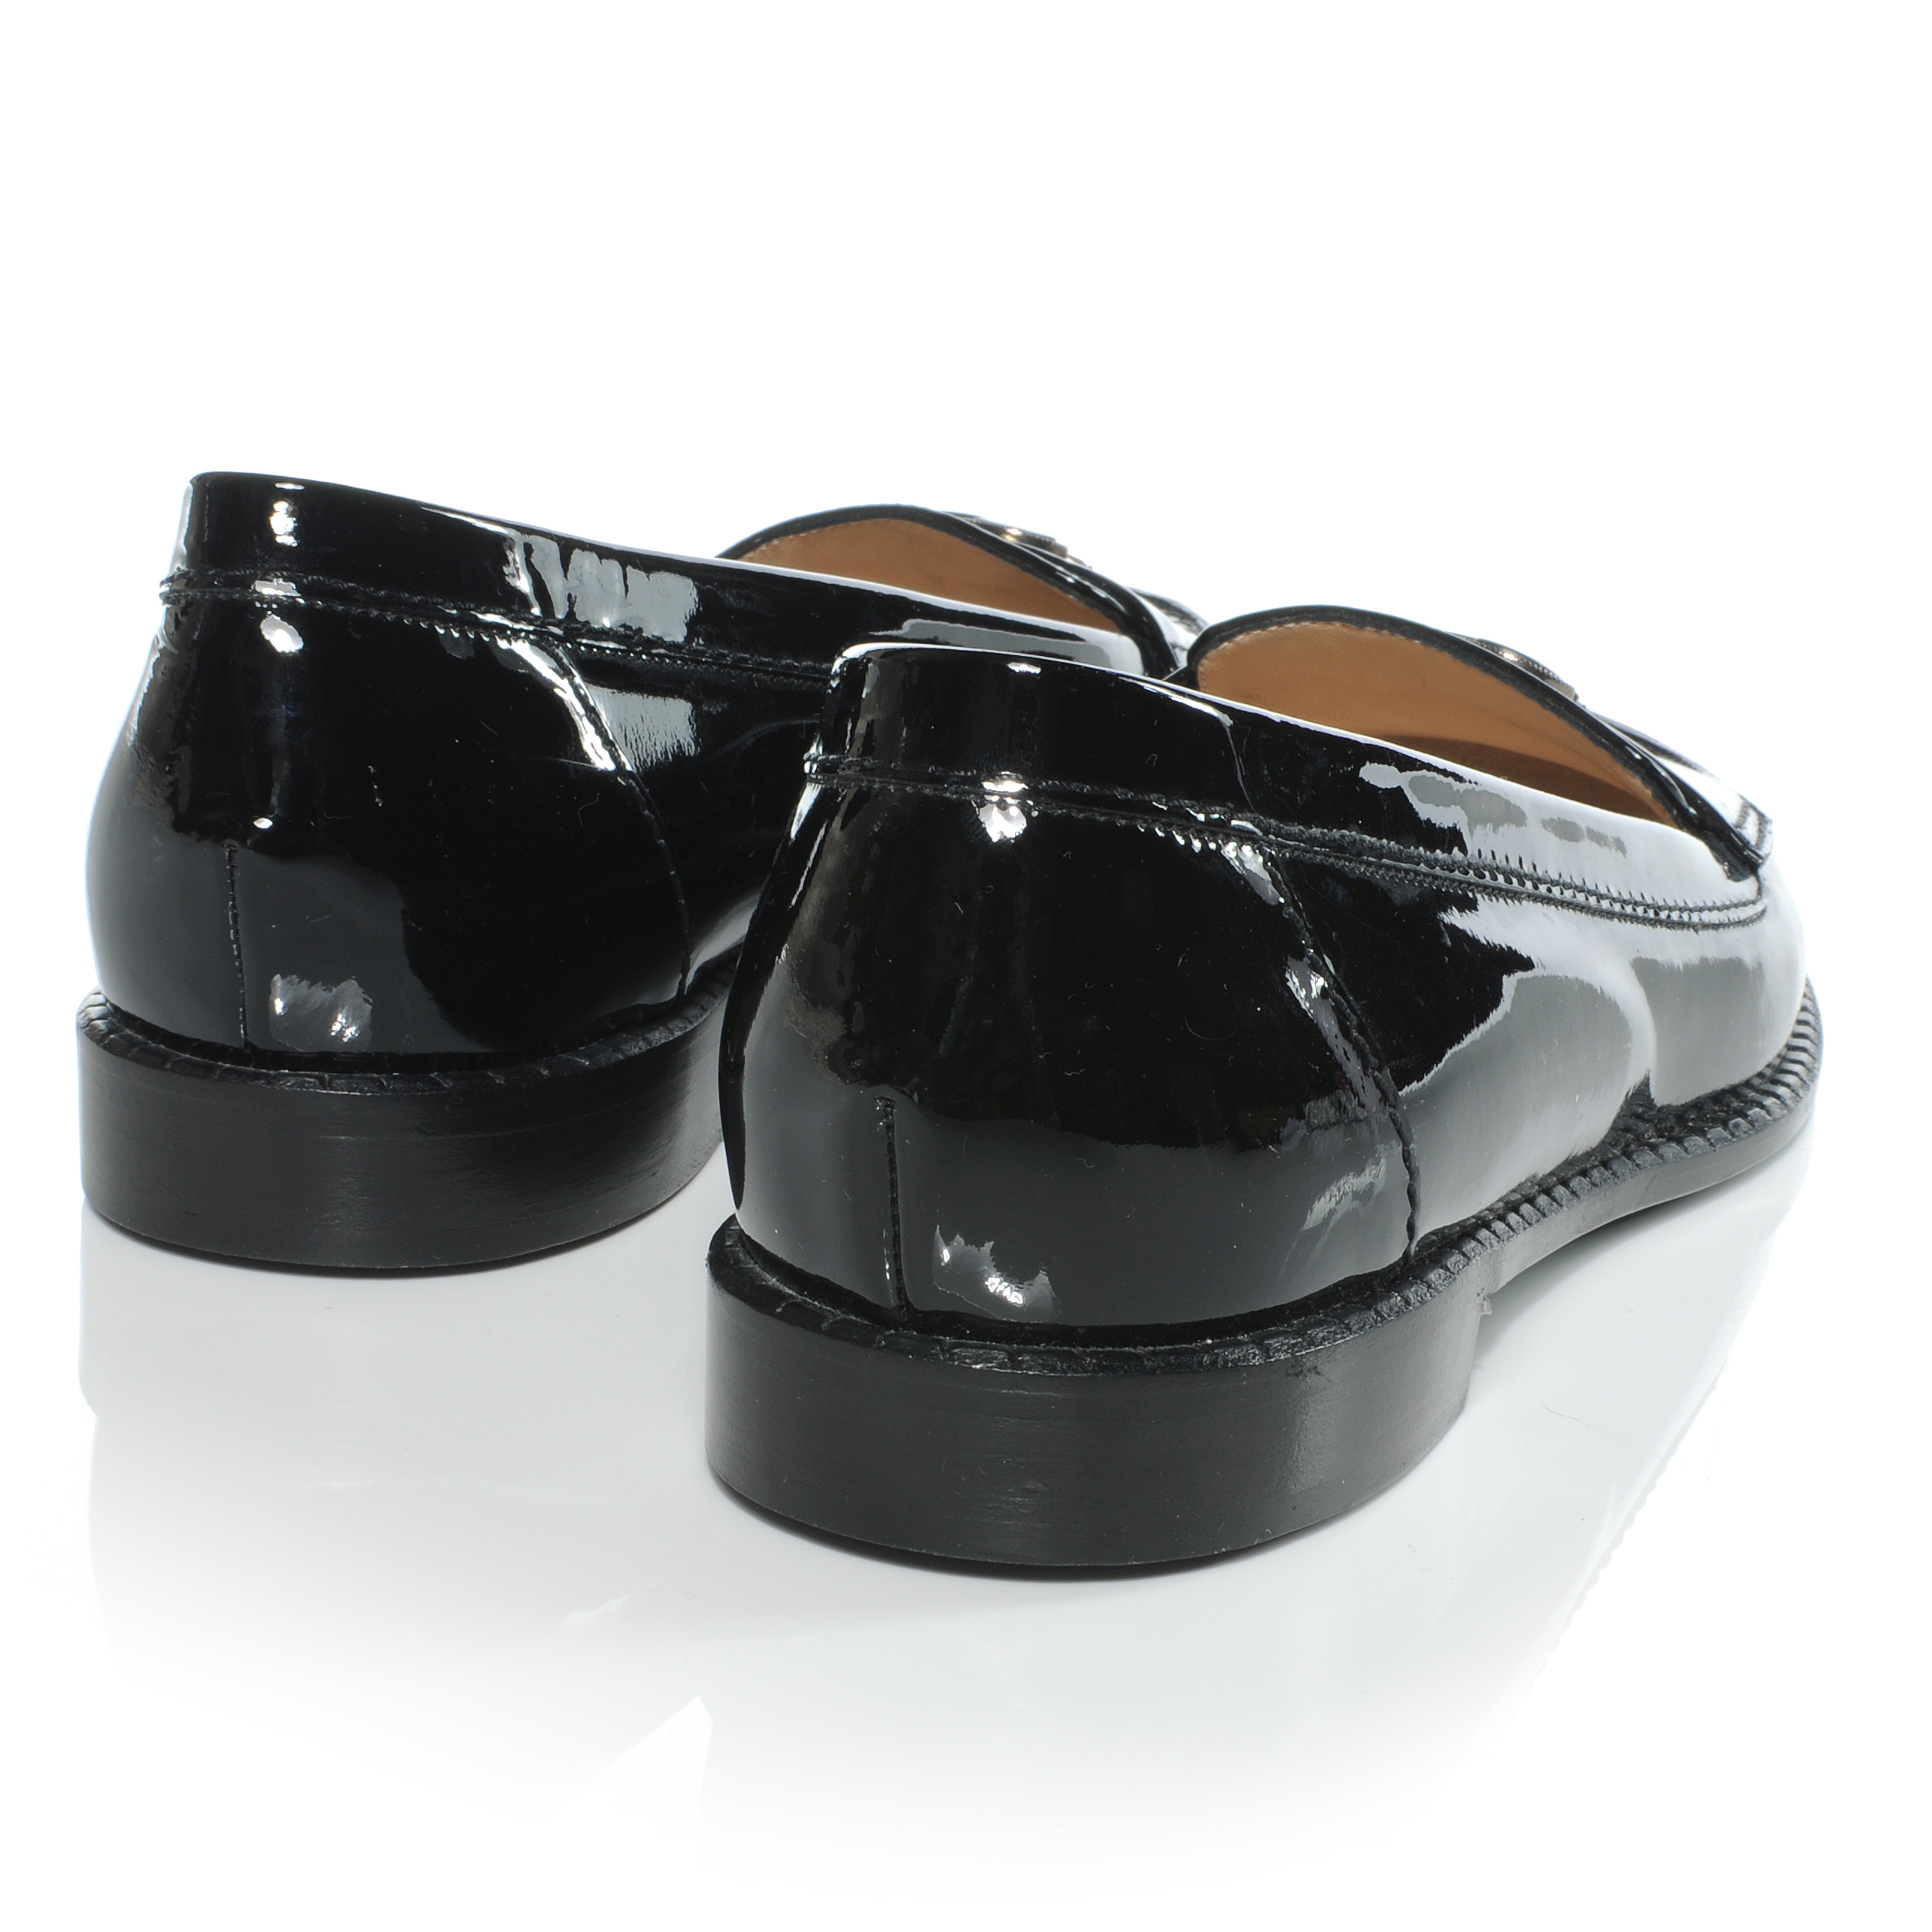 CHANEL Patent Leather Loafers 38.5 Black 41215